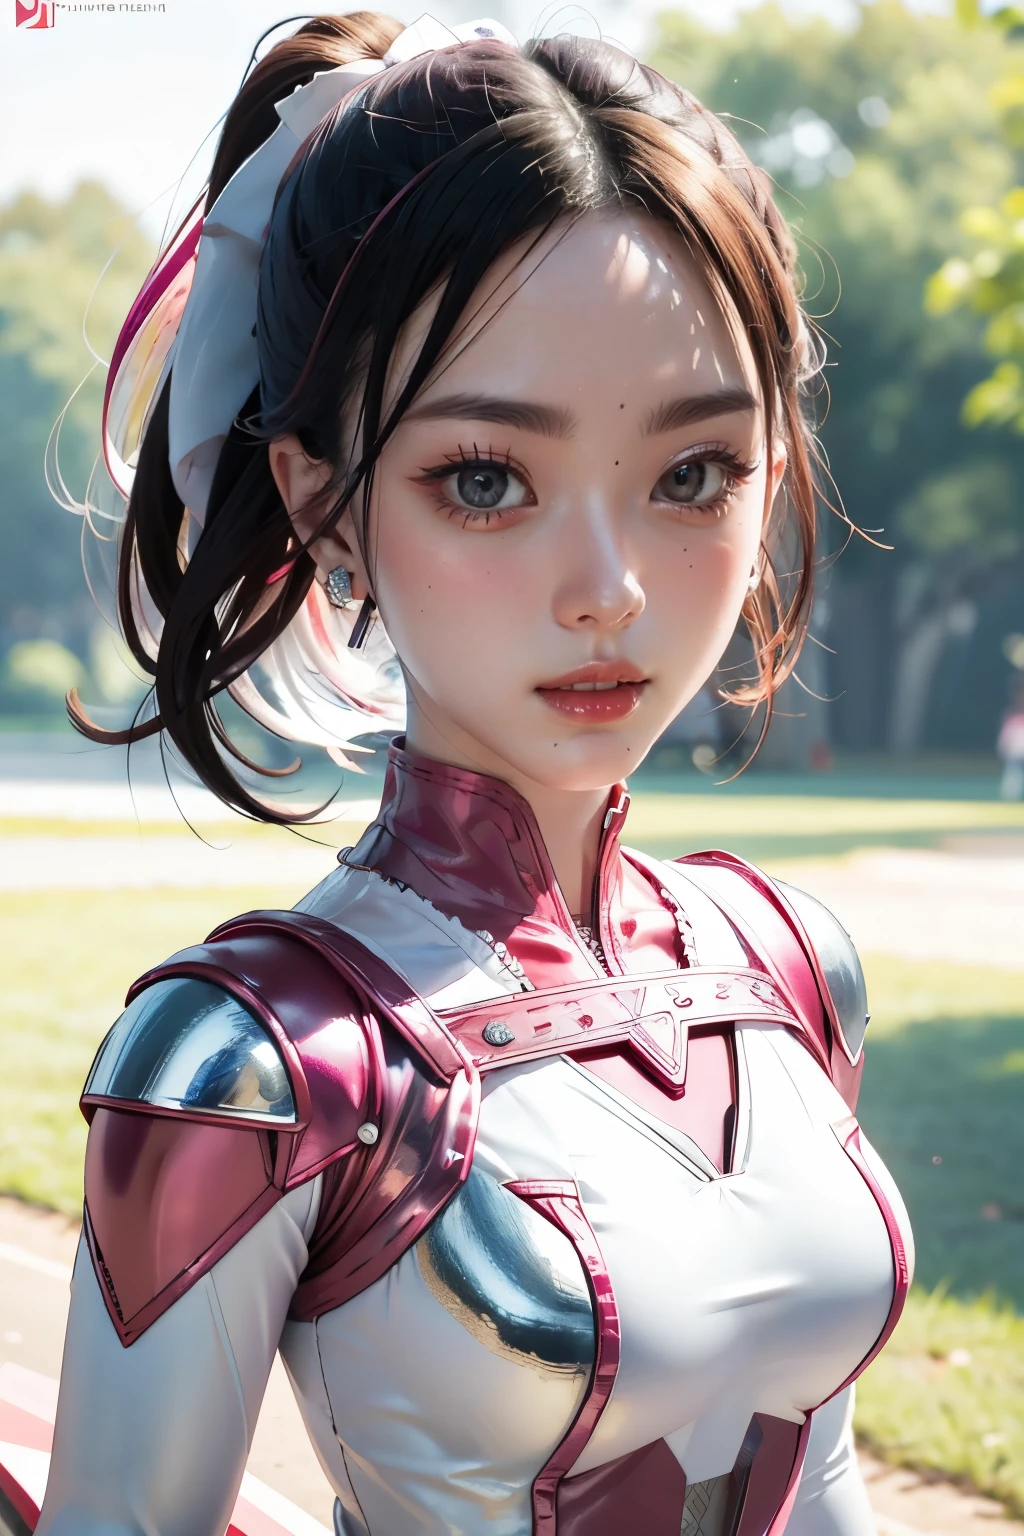 ((PinkRanger, EnakoV1)), 1girl, A beautiful 20 years old Japanese girl, Angelic, cute face,
Beautiful detailed eyes, 
(Large eyes:1.3),long eyelashes,
see-through bangs,
(beautiful detailed face and eyes:1.4), 
Beautiful short dark hair, beautiful smile,
(Best Quality:1.2),
Raw photo, 
High resolution, 
perfect detail, 
Professional Photography, 
Professional Lighting, (Metallic coral magenta and White Hero Suit:1.3), Ultra-tight fit bodysuit, Belt, Huge breasts, Beautiful legs, Strong lighting of the bodysuit,in the park, sexy figure:1.2, half body portrait